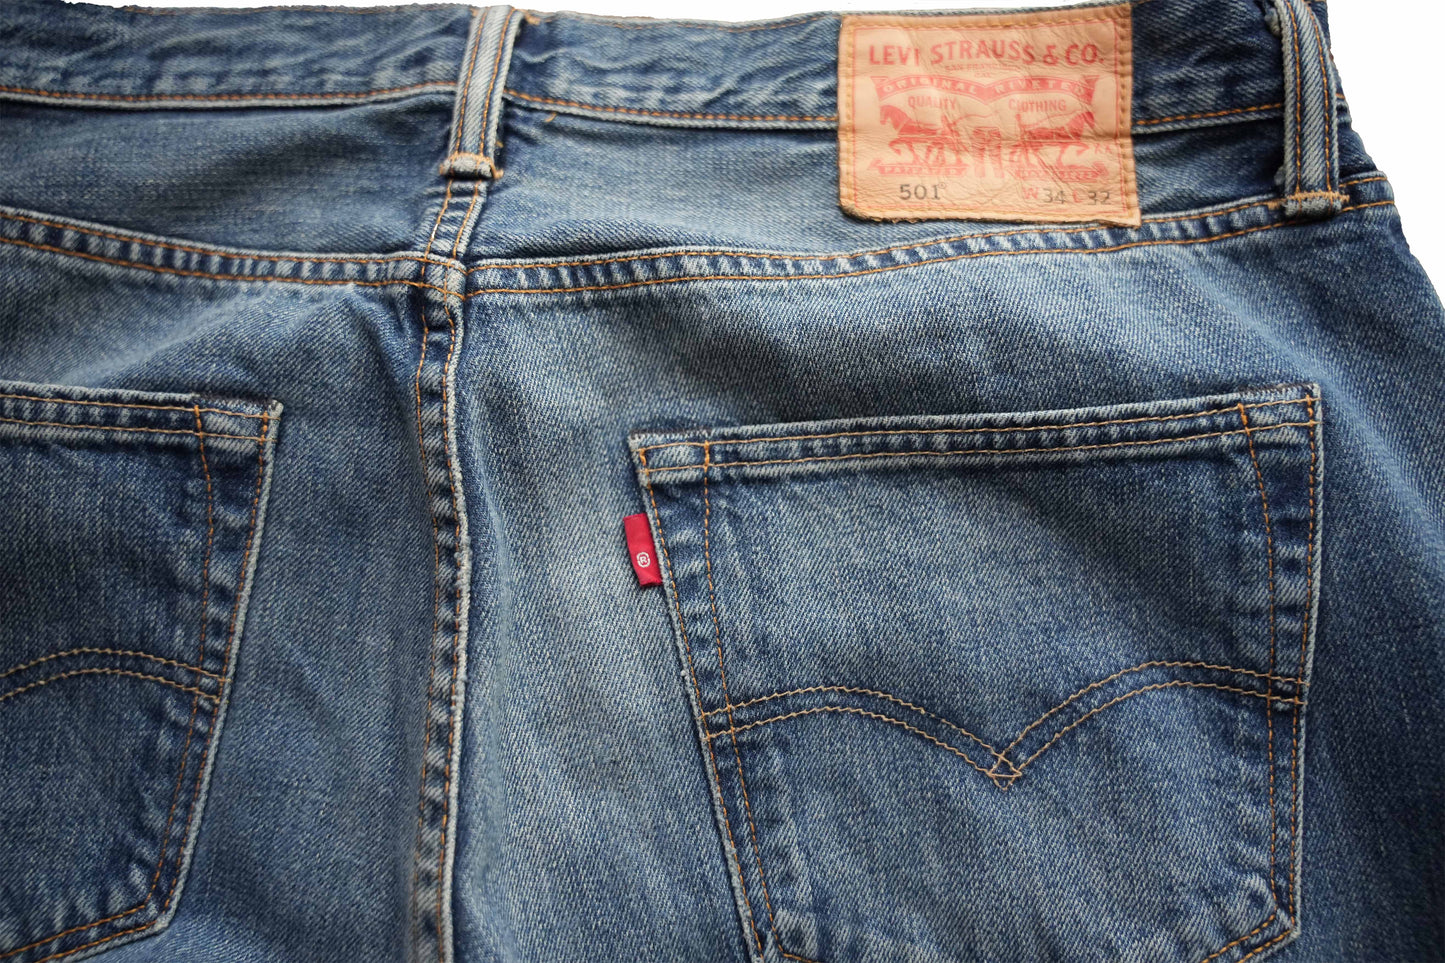 Levi’s 501 W34/L32 サークルR made in Poland